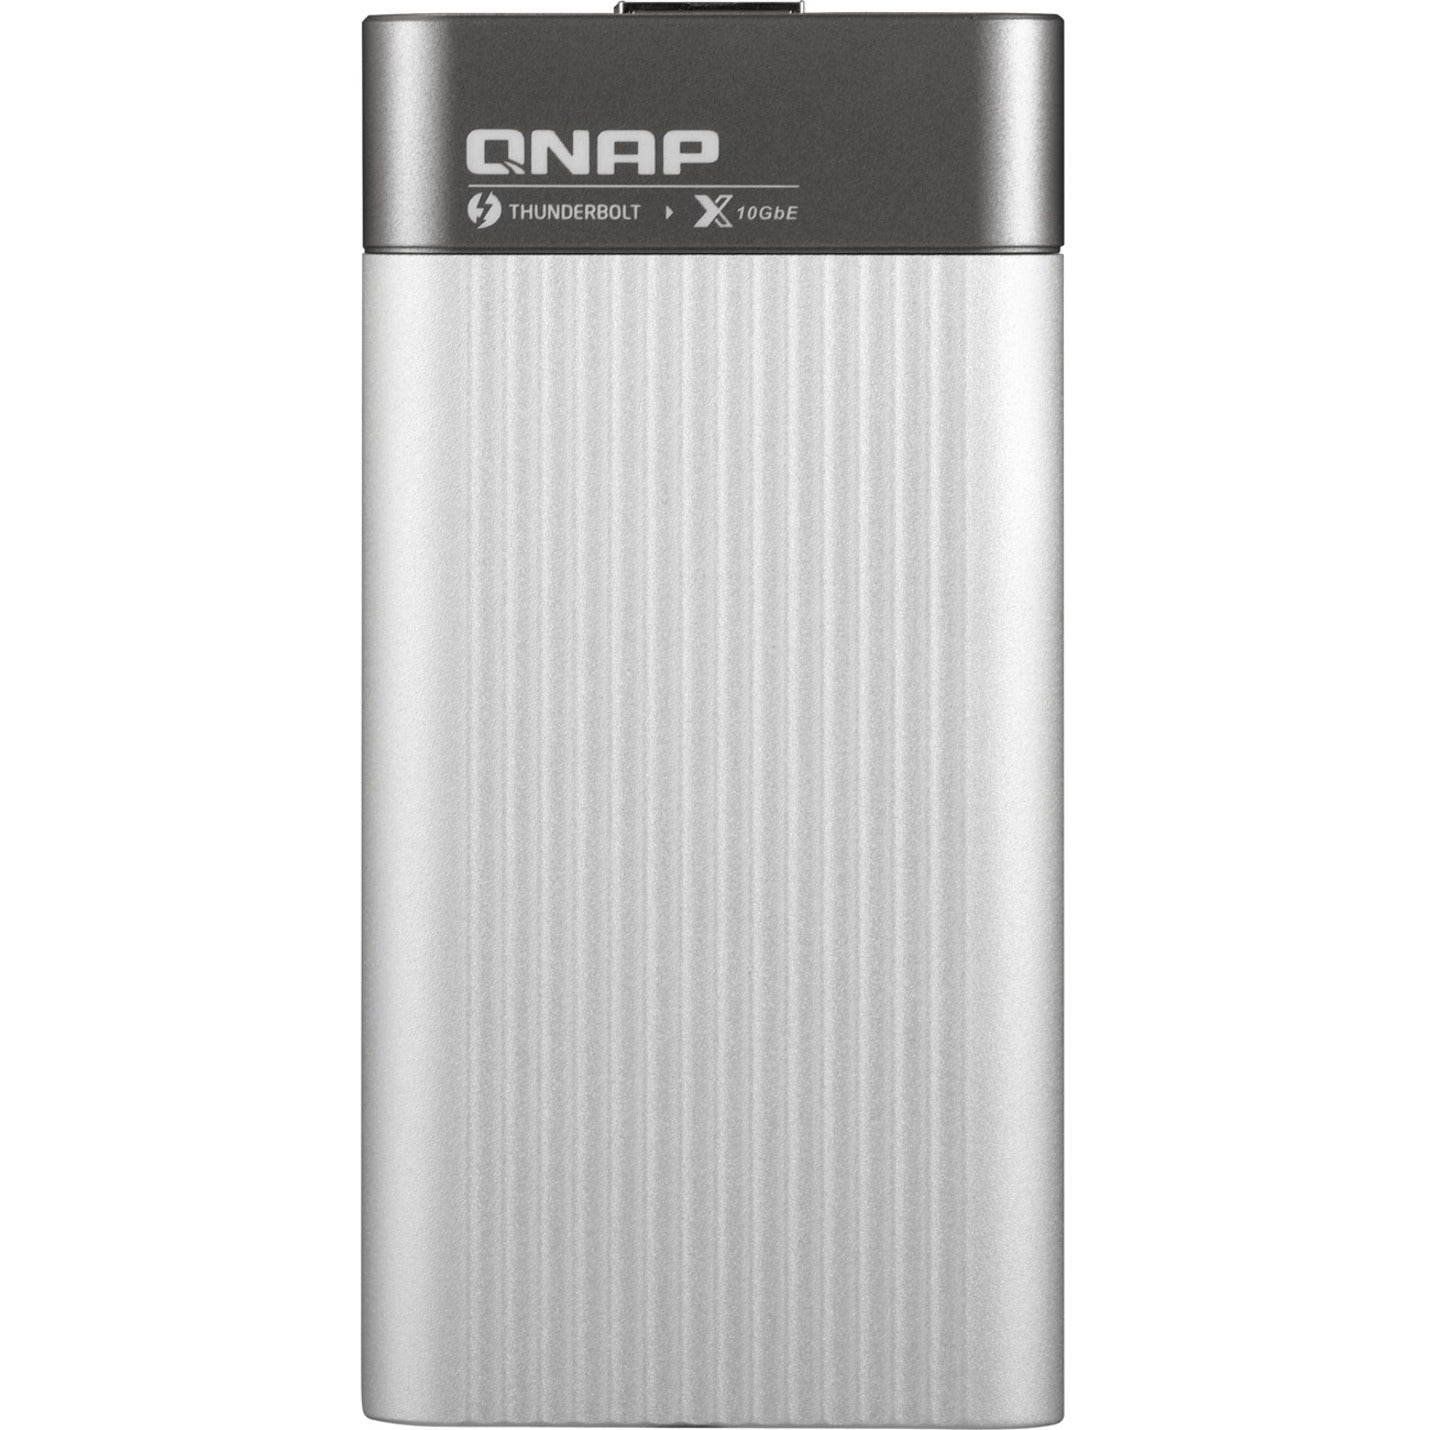 QNAP QNA-T310G1T Thunderbolt 3 to 10GbE Adapter, High-Speed Ethernet Connectivity